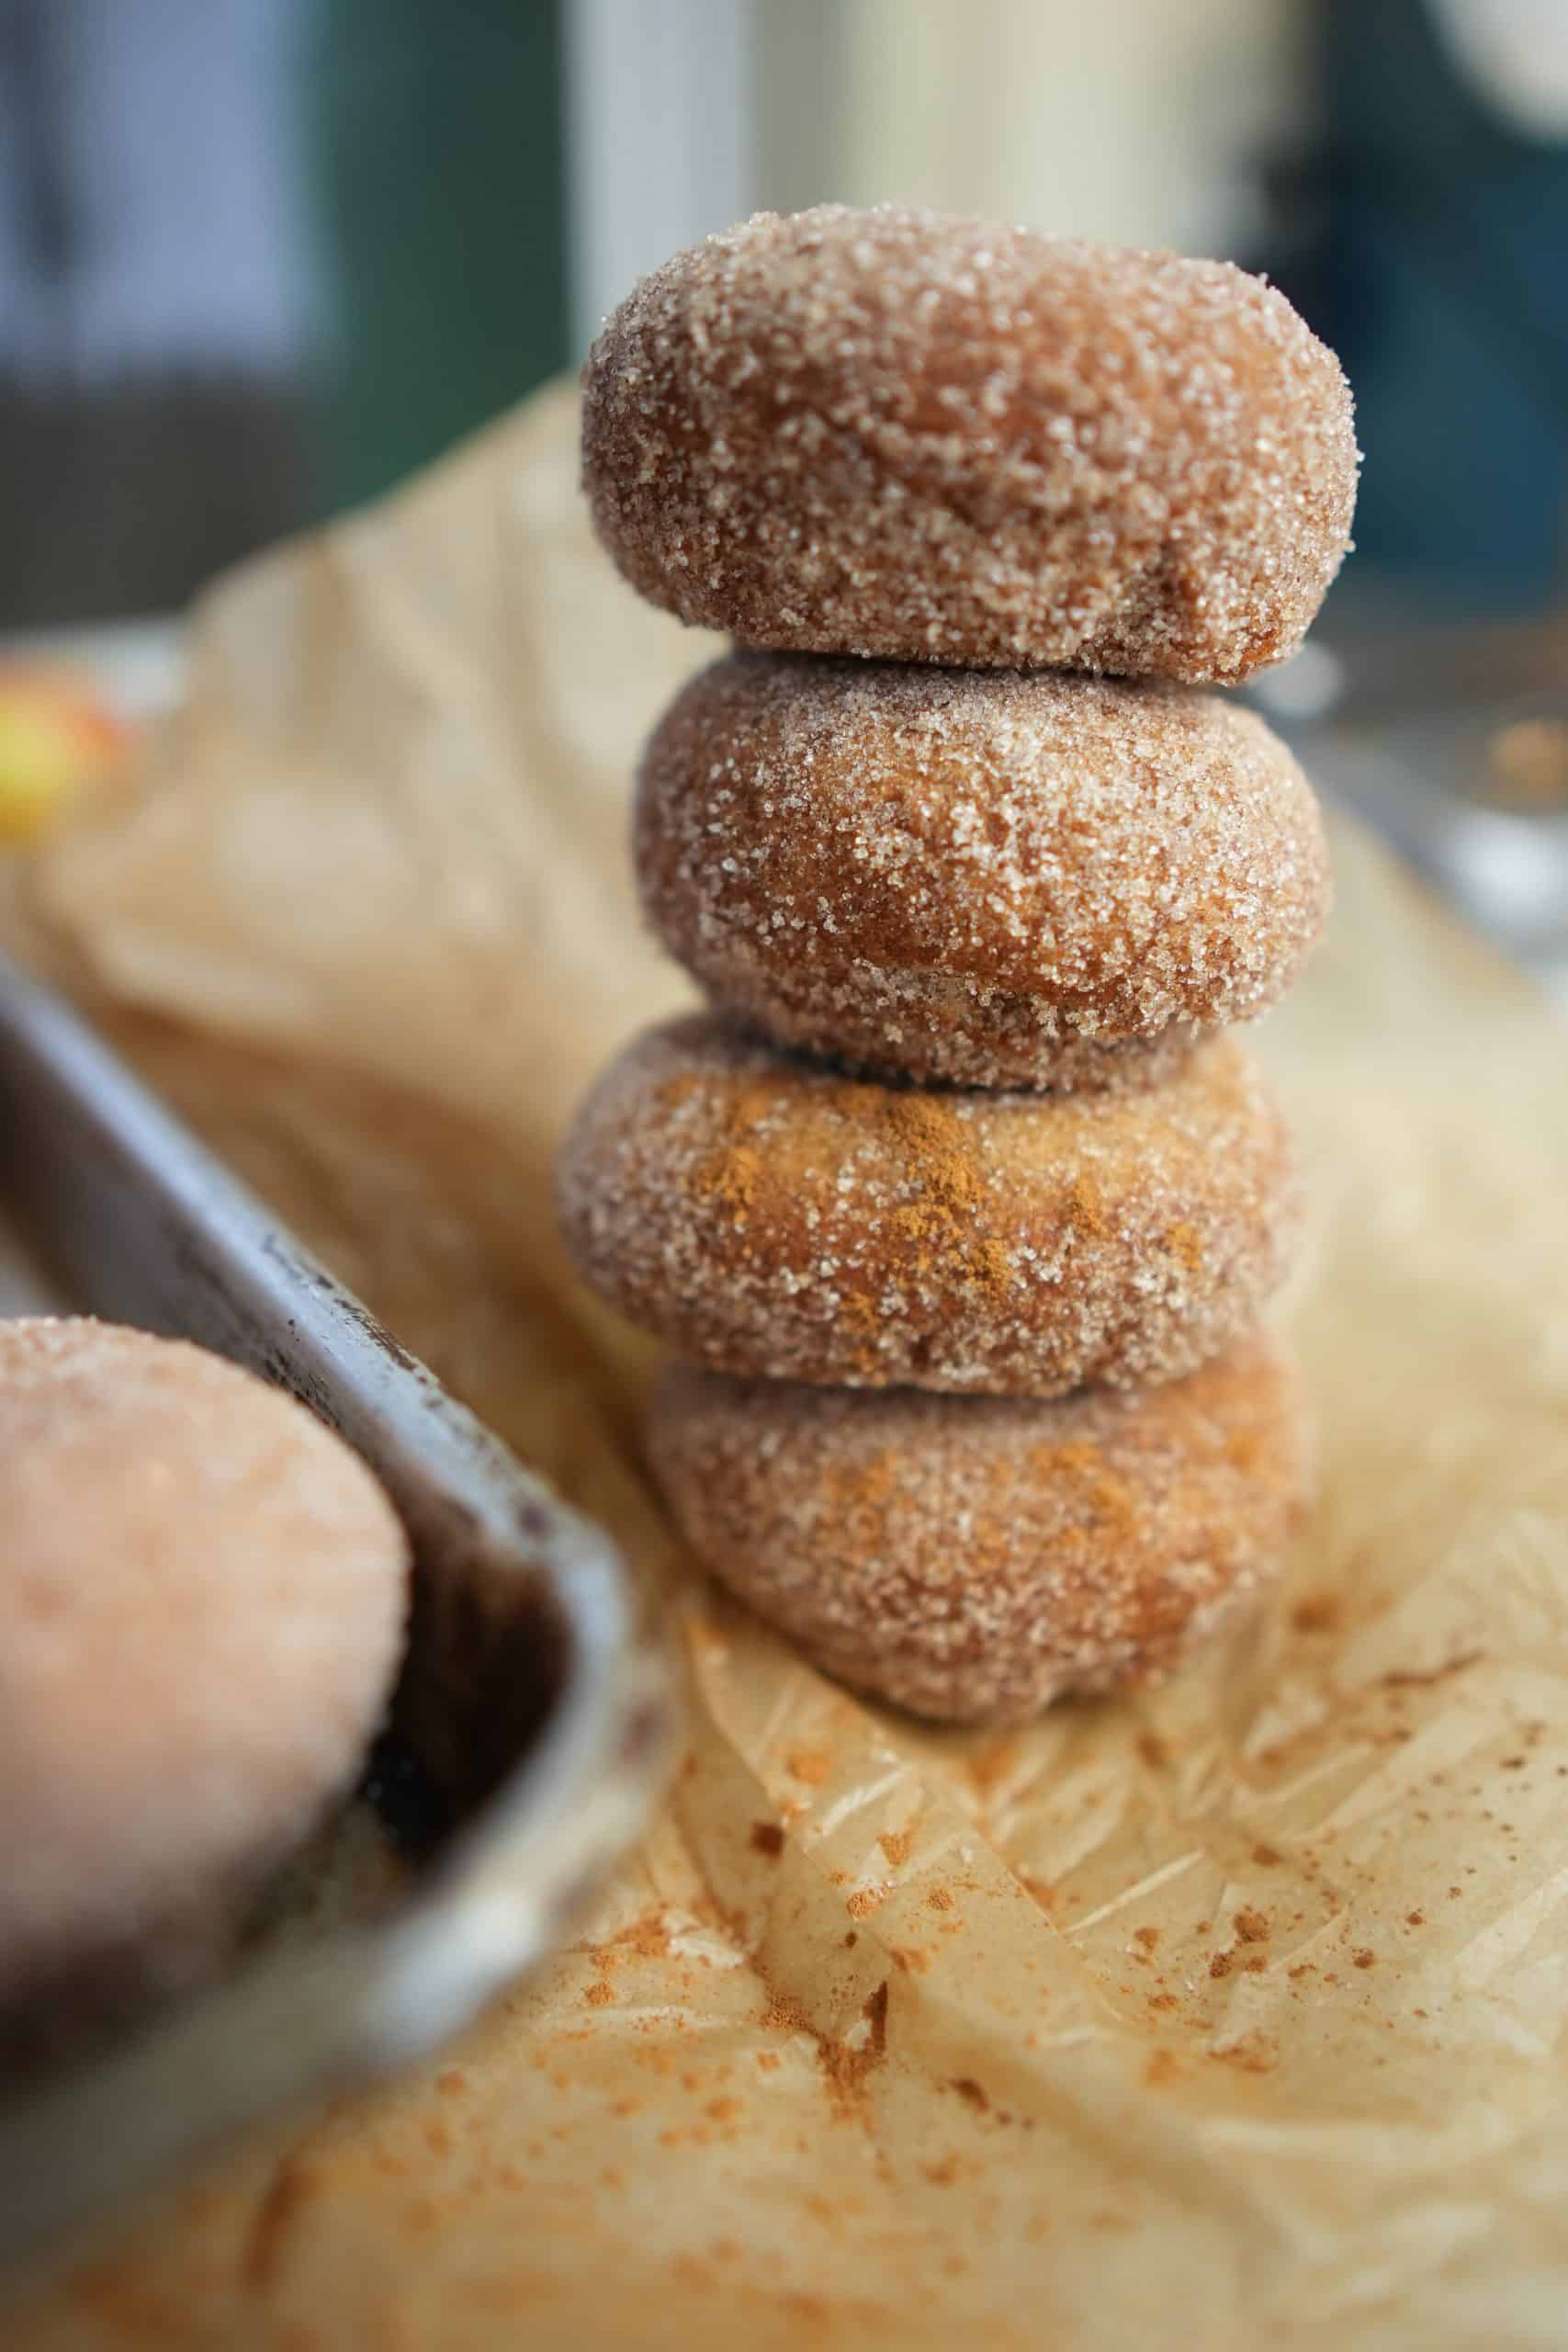 Apple cider donuts stacked up on top of each other on wax paper.